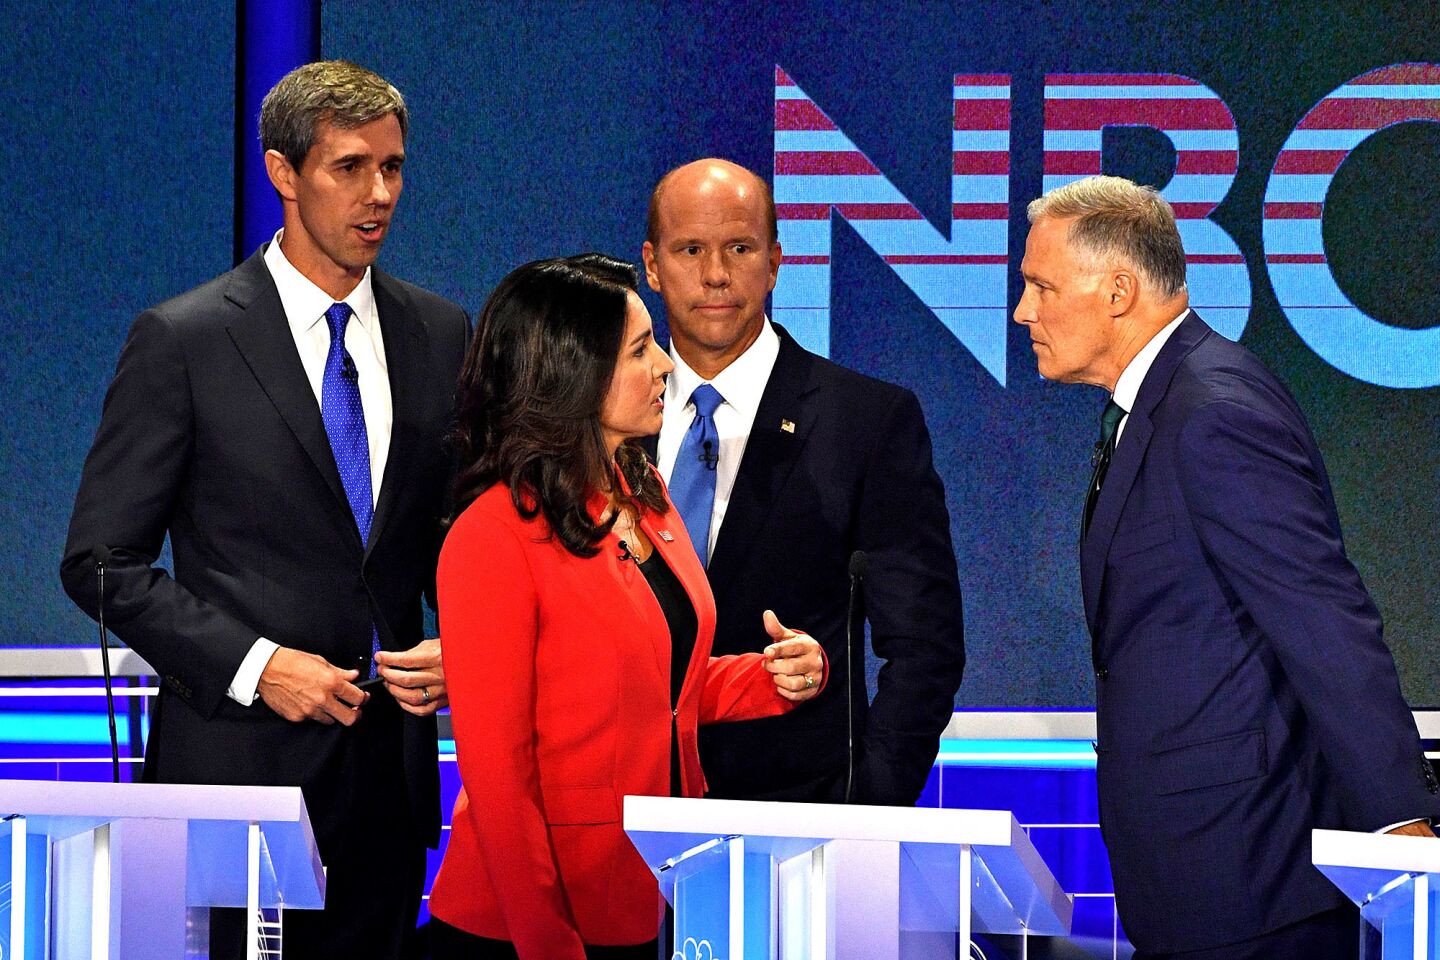 Democratic presidential hopeful US Representative for Hawaii's 2nd congressional district Tulsi Gabbard (C) speak to Governor of Washington Jay Inslee (R), former US Representative for Maryland's 6th congressional district John Delaney and former US Representative for Texas' 16th congressional district Beto O'Rourke during a brake of the first Democratic primary debate of the 2020 presidential campaign season hosted by NBC News at the Adrienne Arsht Center for the Performing Arts in Miami, Florida, June 26, 2019.